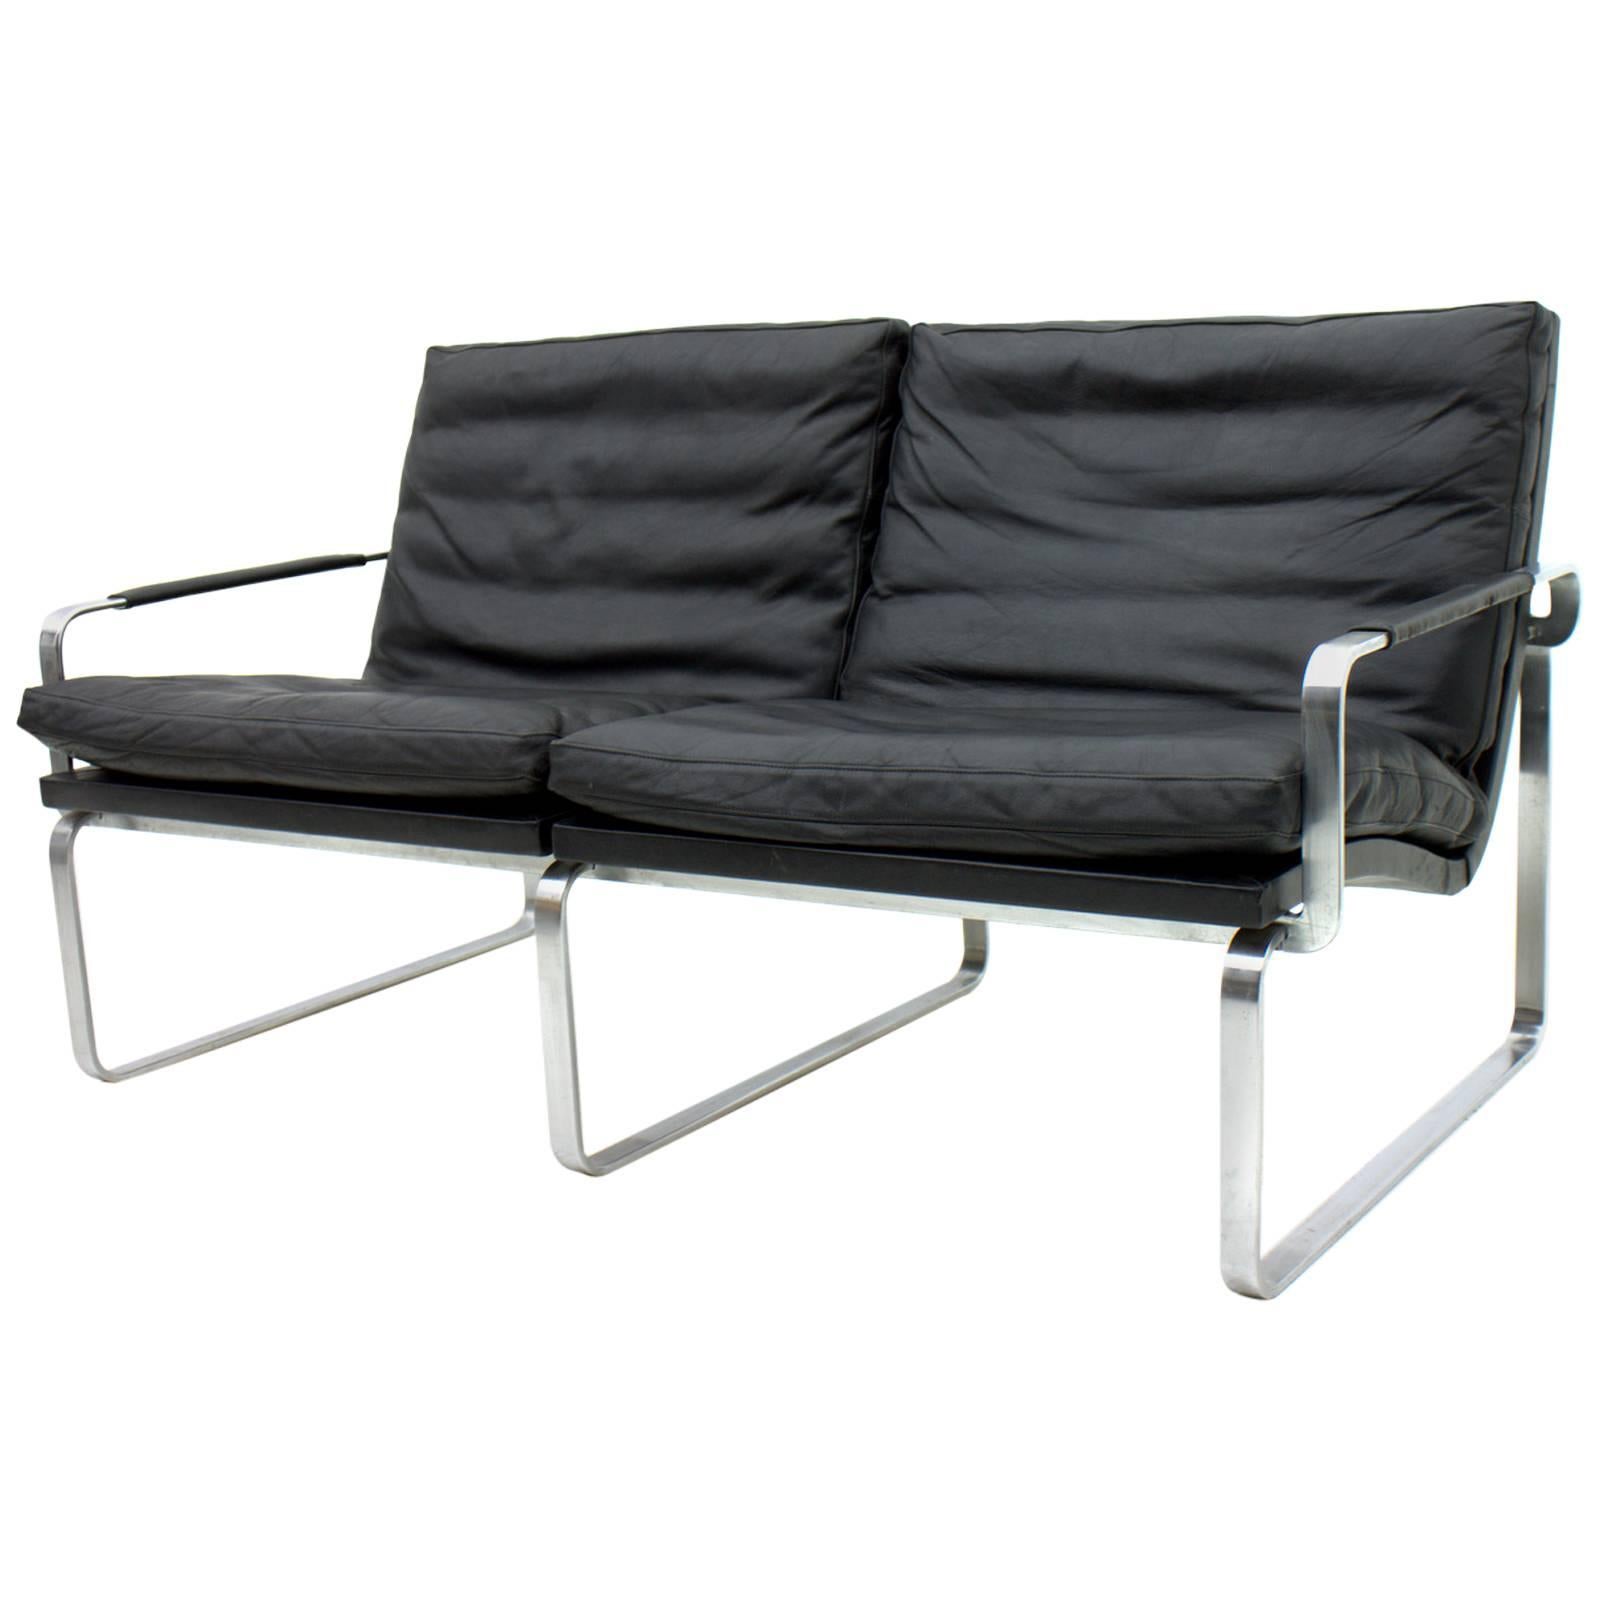 Two Person Sofa by Jørgen Lund & Ole Larsen for Bo-Ex, Denmark, 1960s For Sale